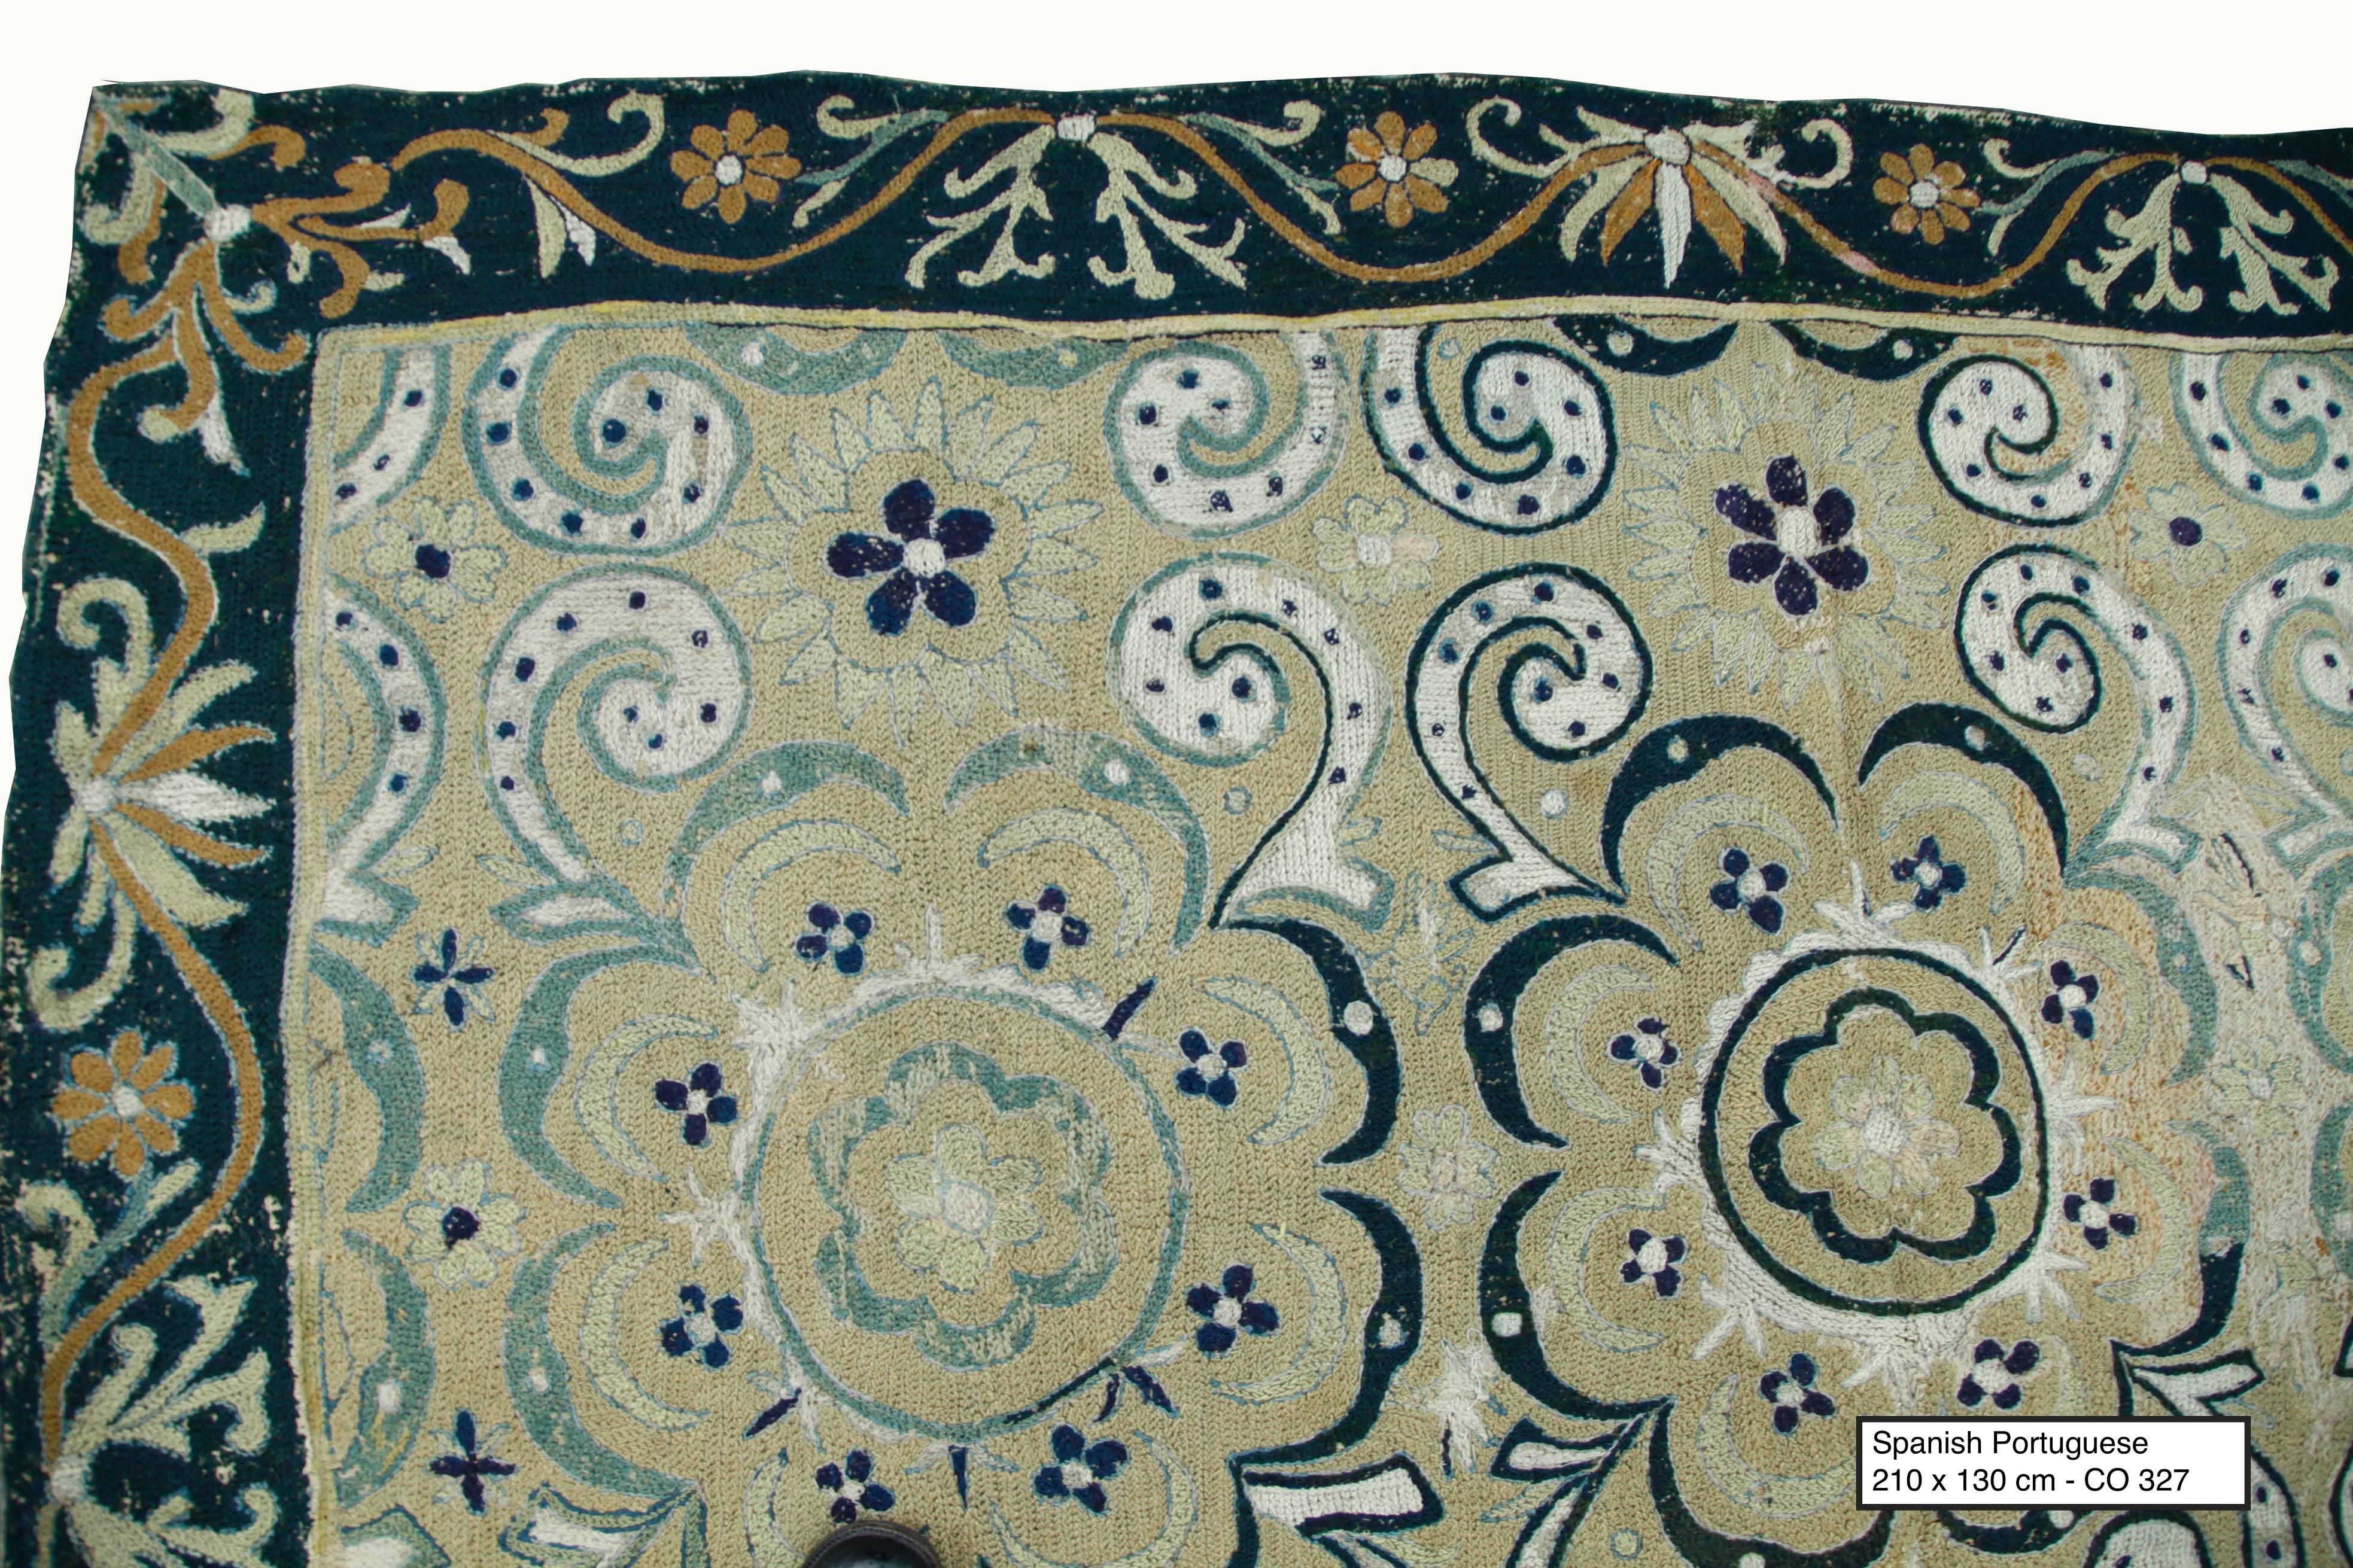 Embroidery in Spain was influenced by two major sources, the Christian lands to the north and the Muslim lands to the south. During the Gothic period, embroidery in Spain as in many other places, was influenced by painting. During the 13th century,